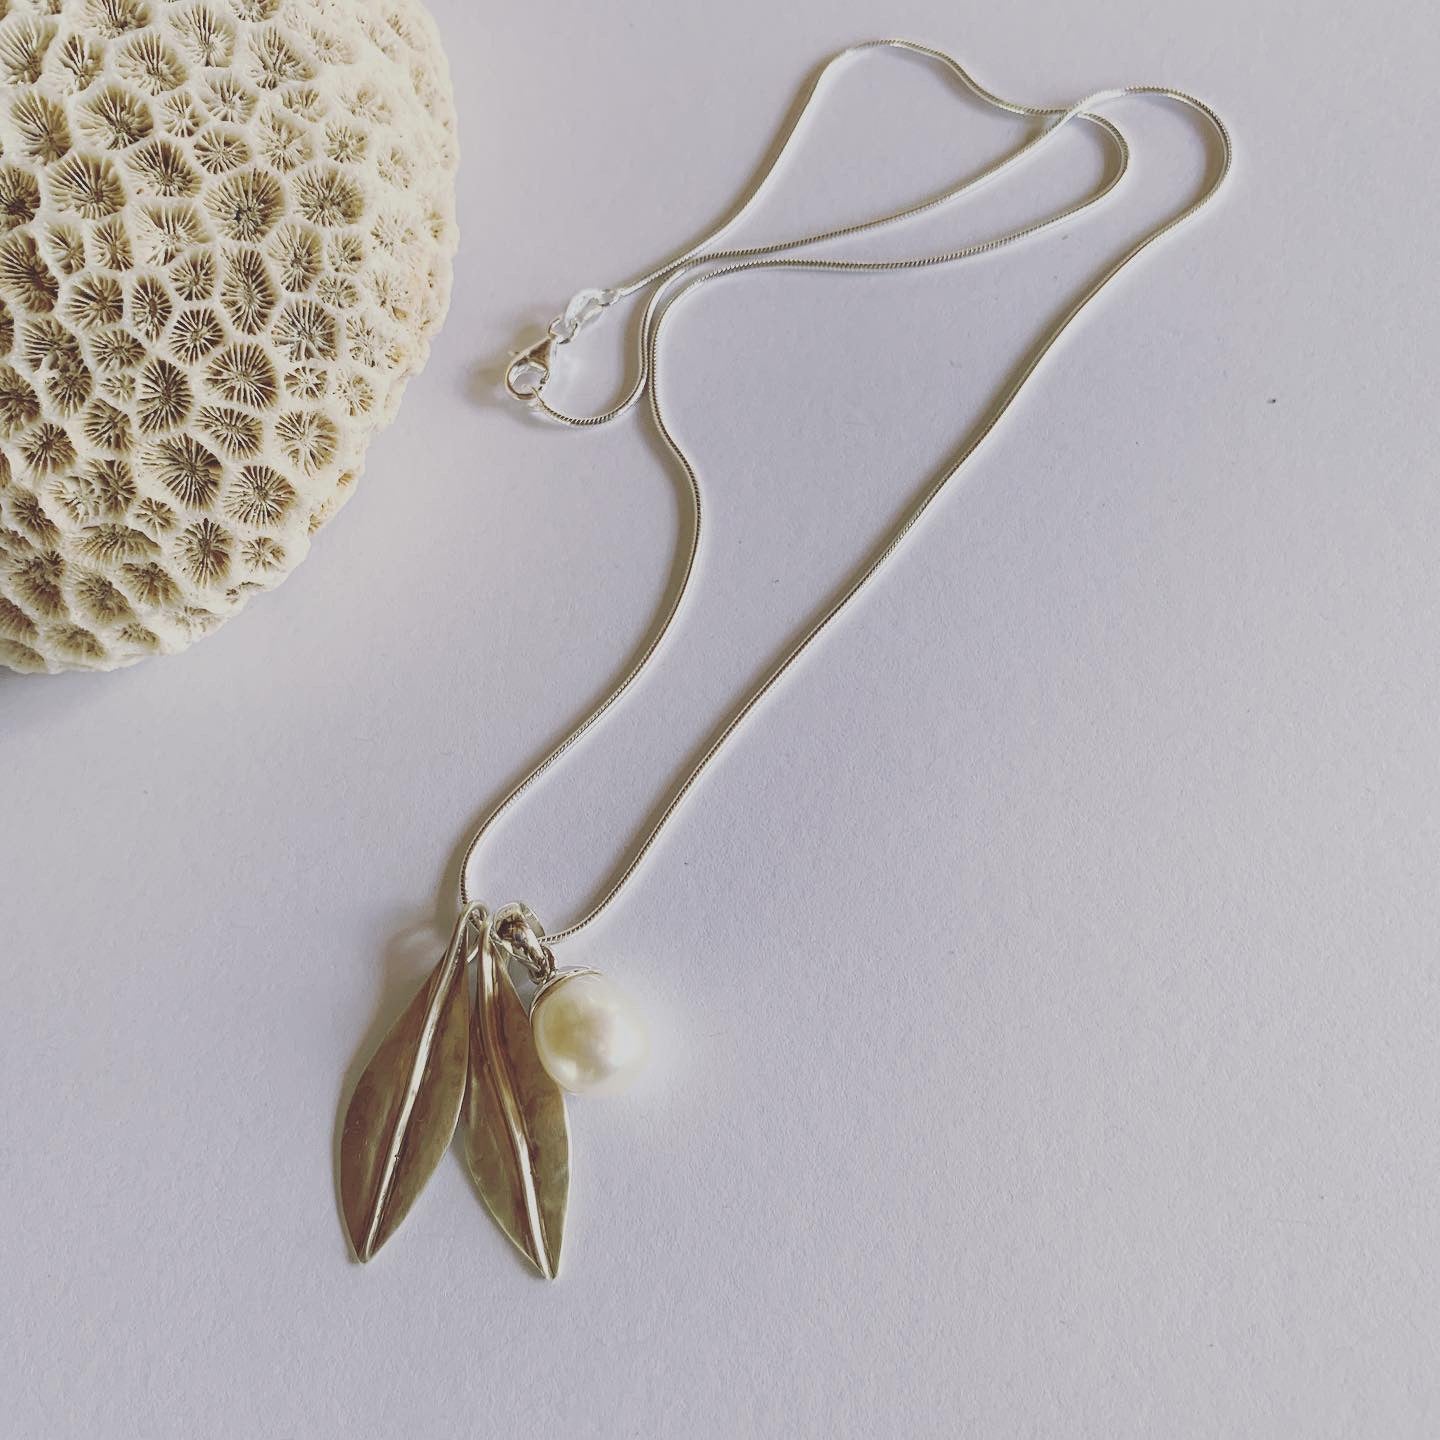 Handmade in silver our special, two leaf and white pearl pendant on sterling silver snake chain.  Available on 45cm and 50cm snake chain.  The charm of earthly delights, where forest and ocean meet, on the gorgeous snake chain🌿